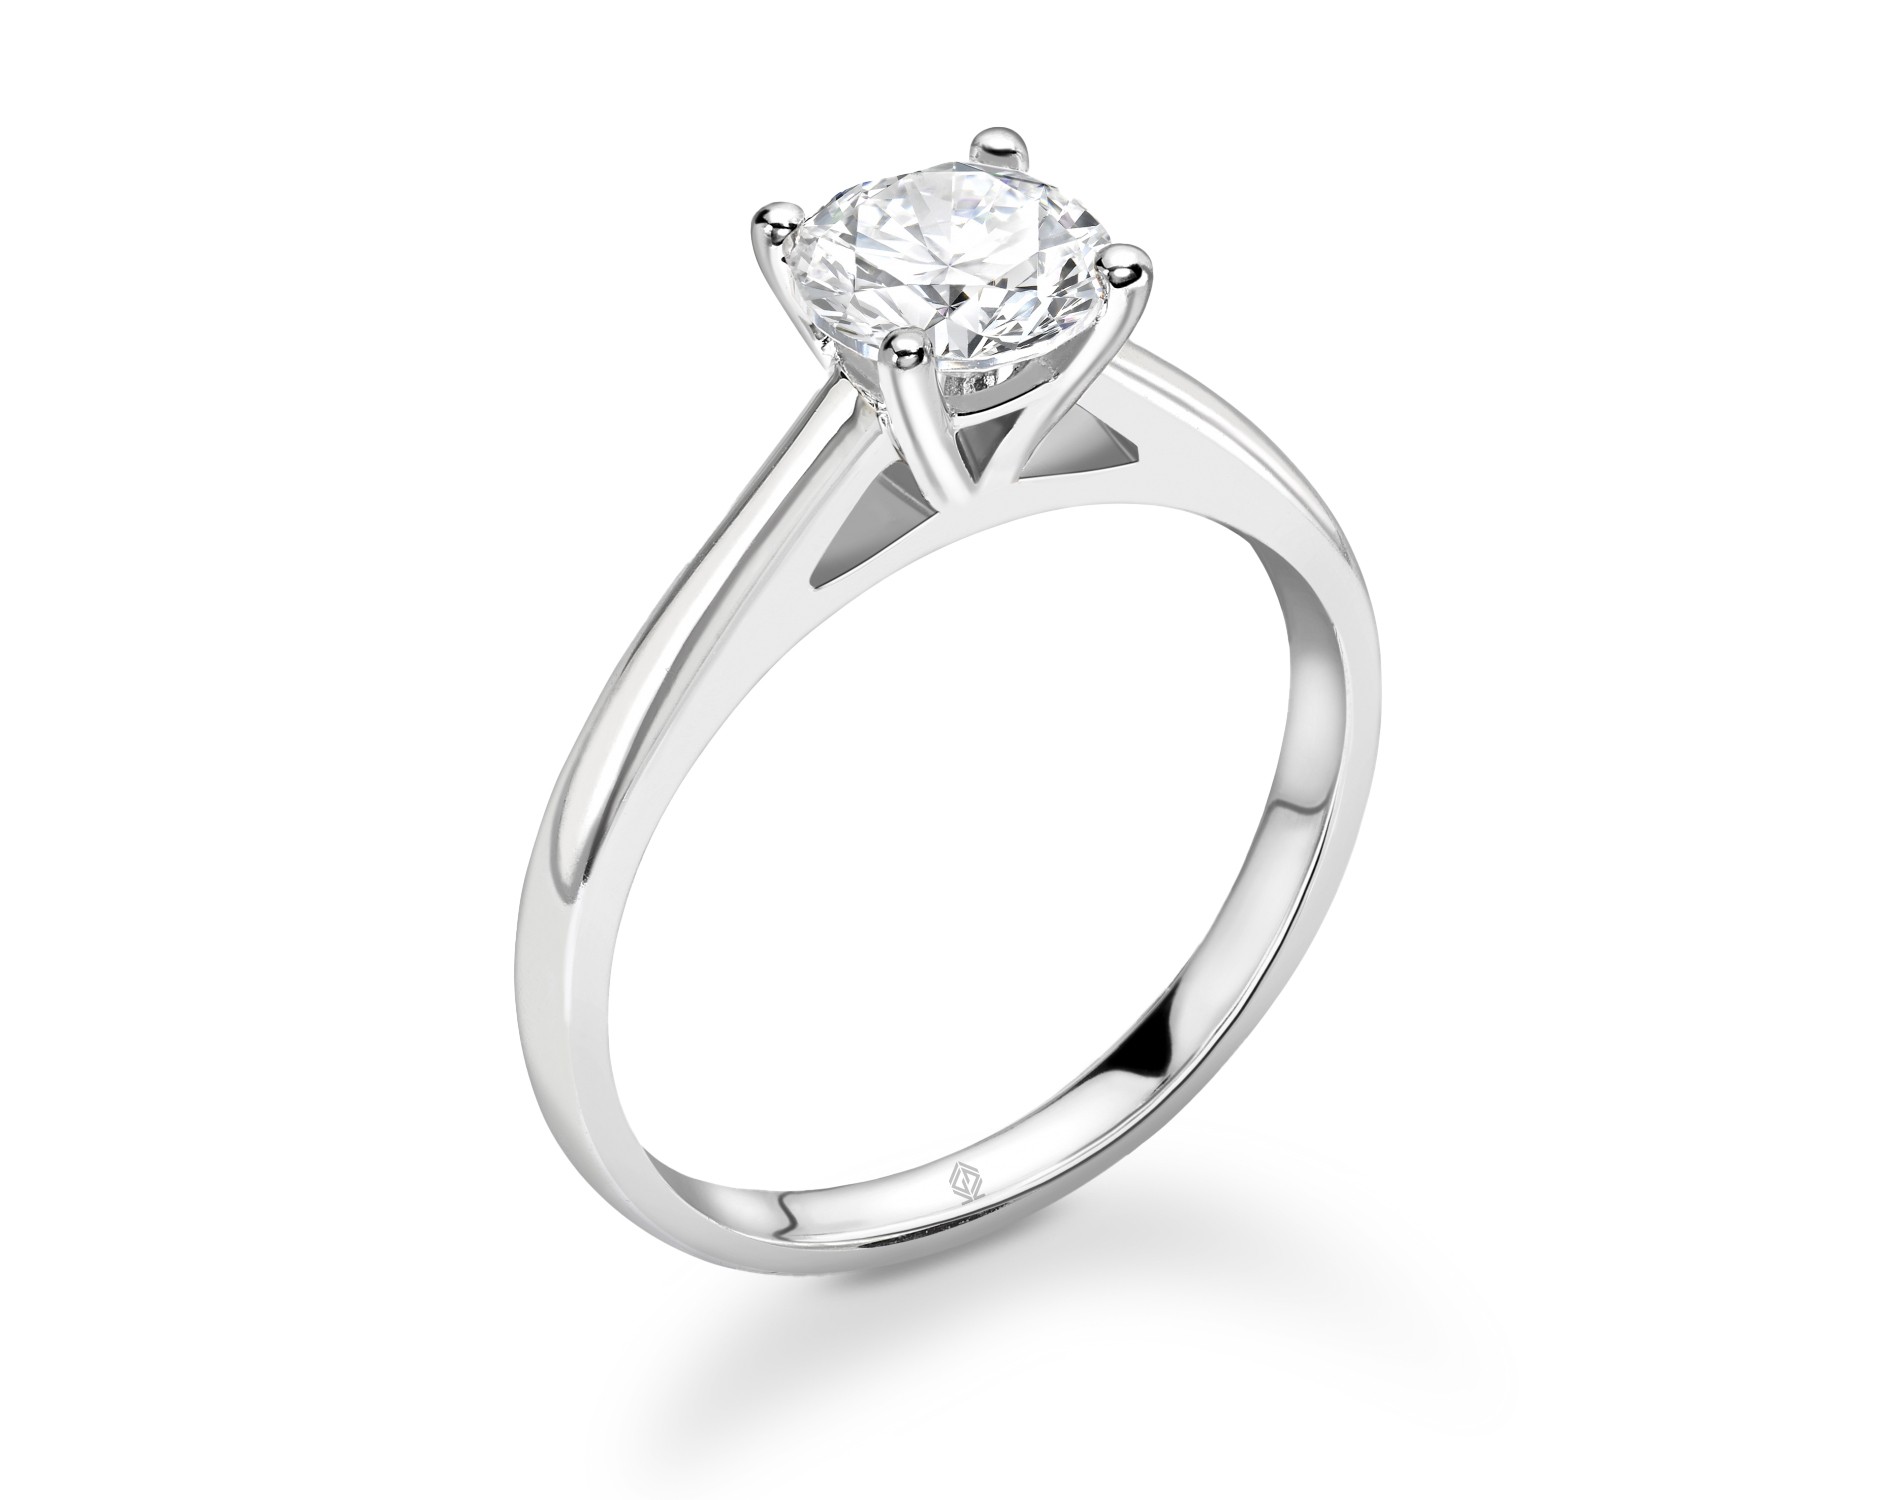 18K WHITE GOLD 4 PRONGS HEAD SOLITAIRE ROUND CUT DIAMOND ENGAGEMENT RING